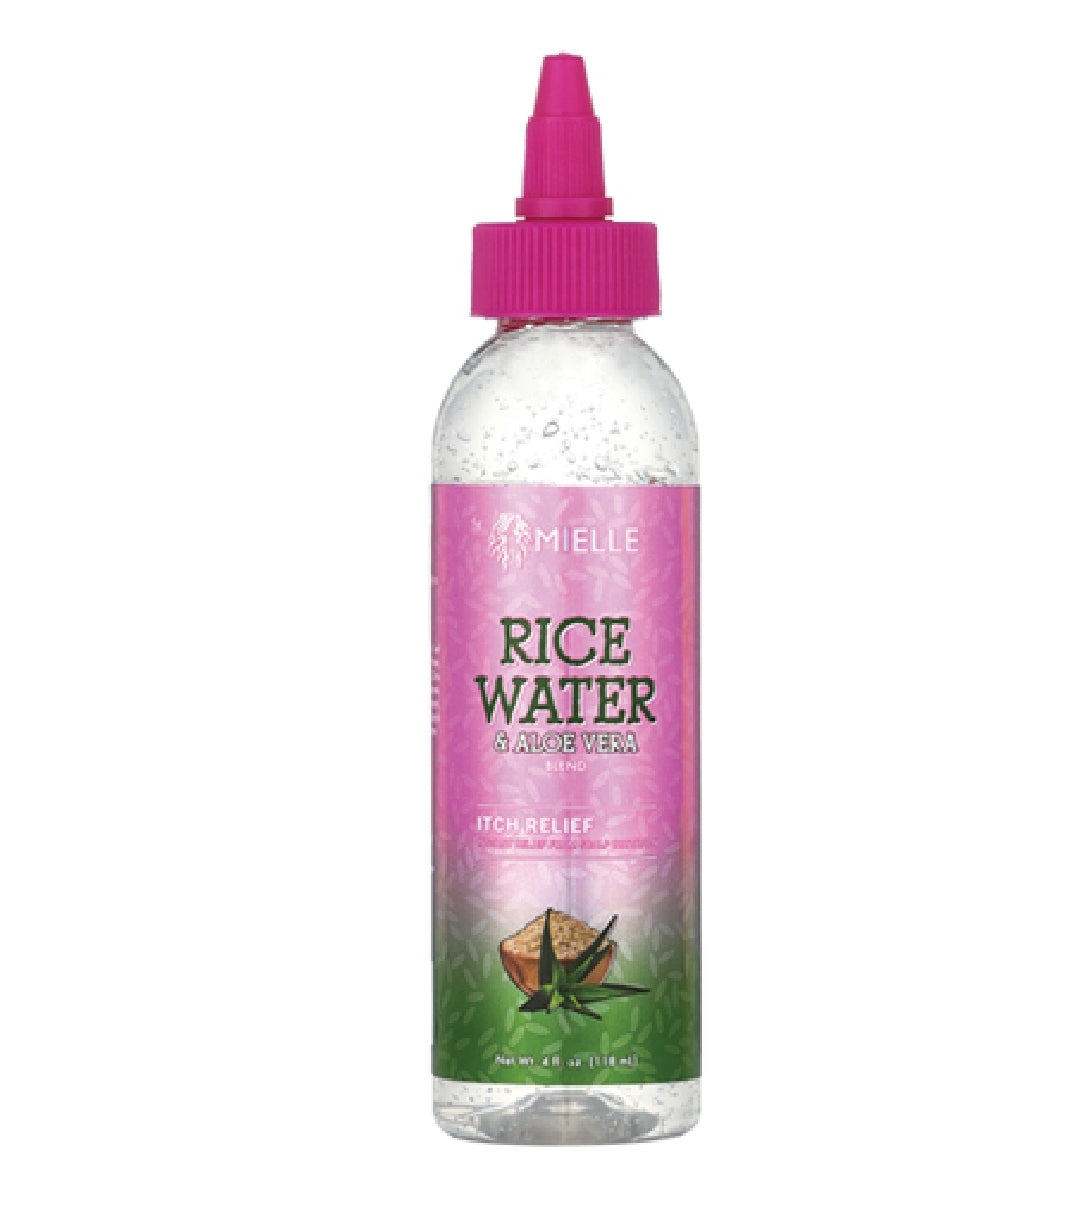 MIELLE RICE WATER &ALLOW ITCH RELIEF